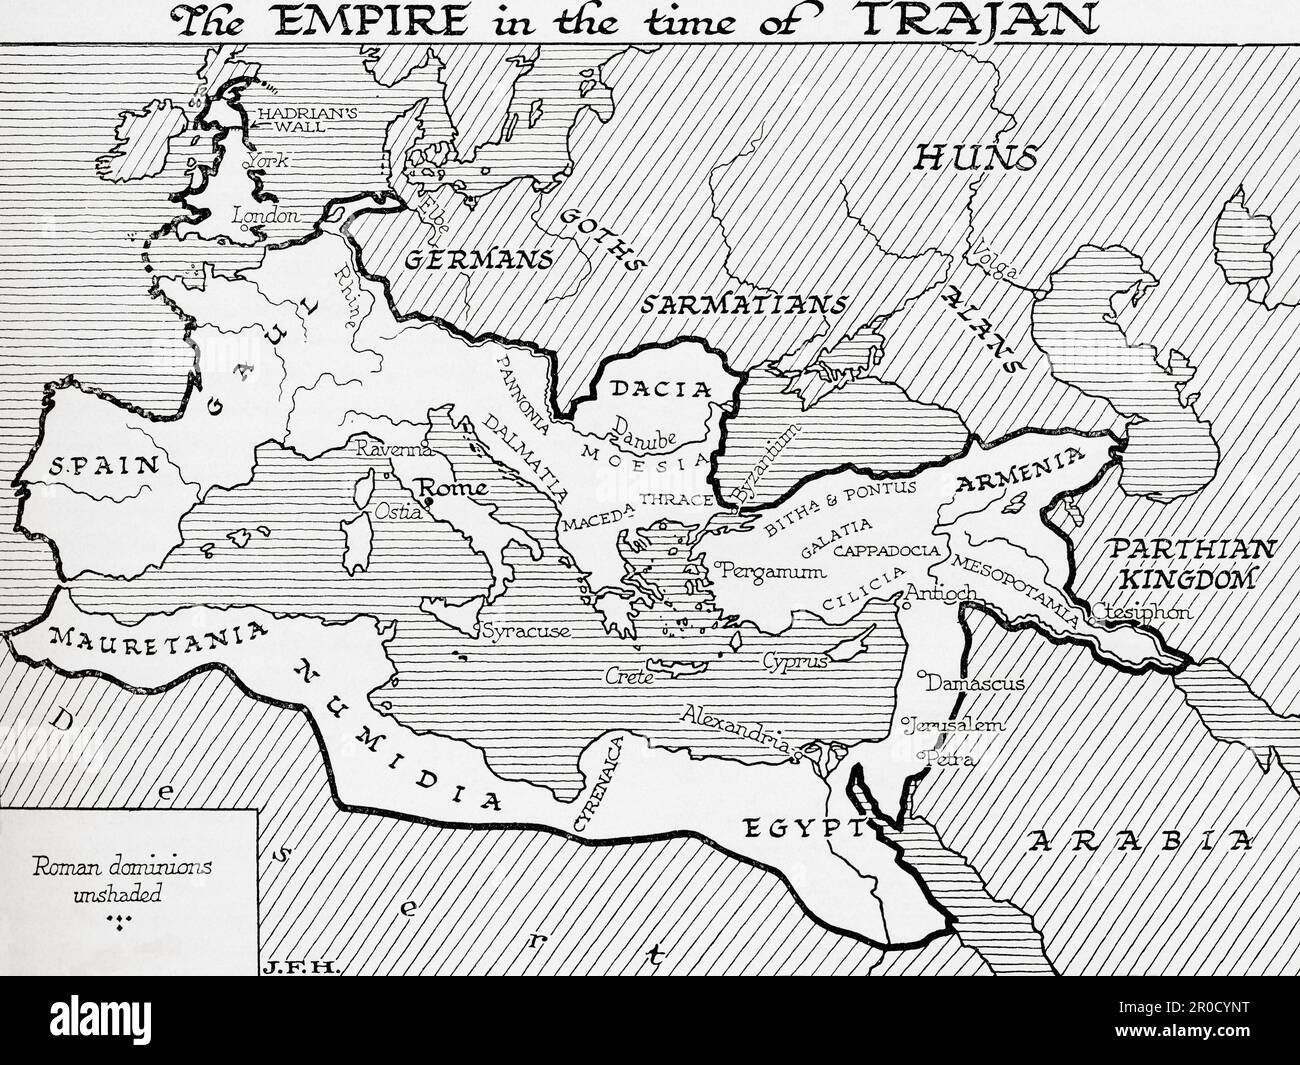 Map of the Roman Empire in the time of Trajan. From the book Outline of ...